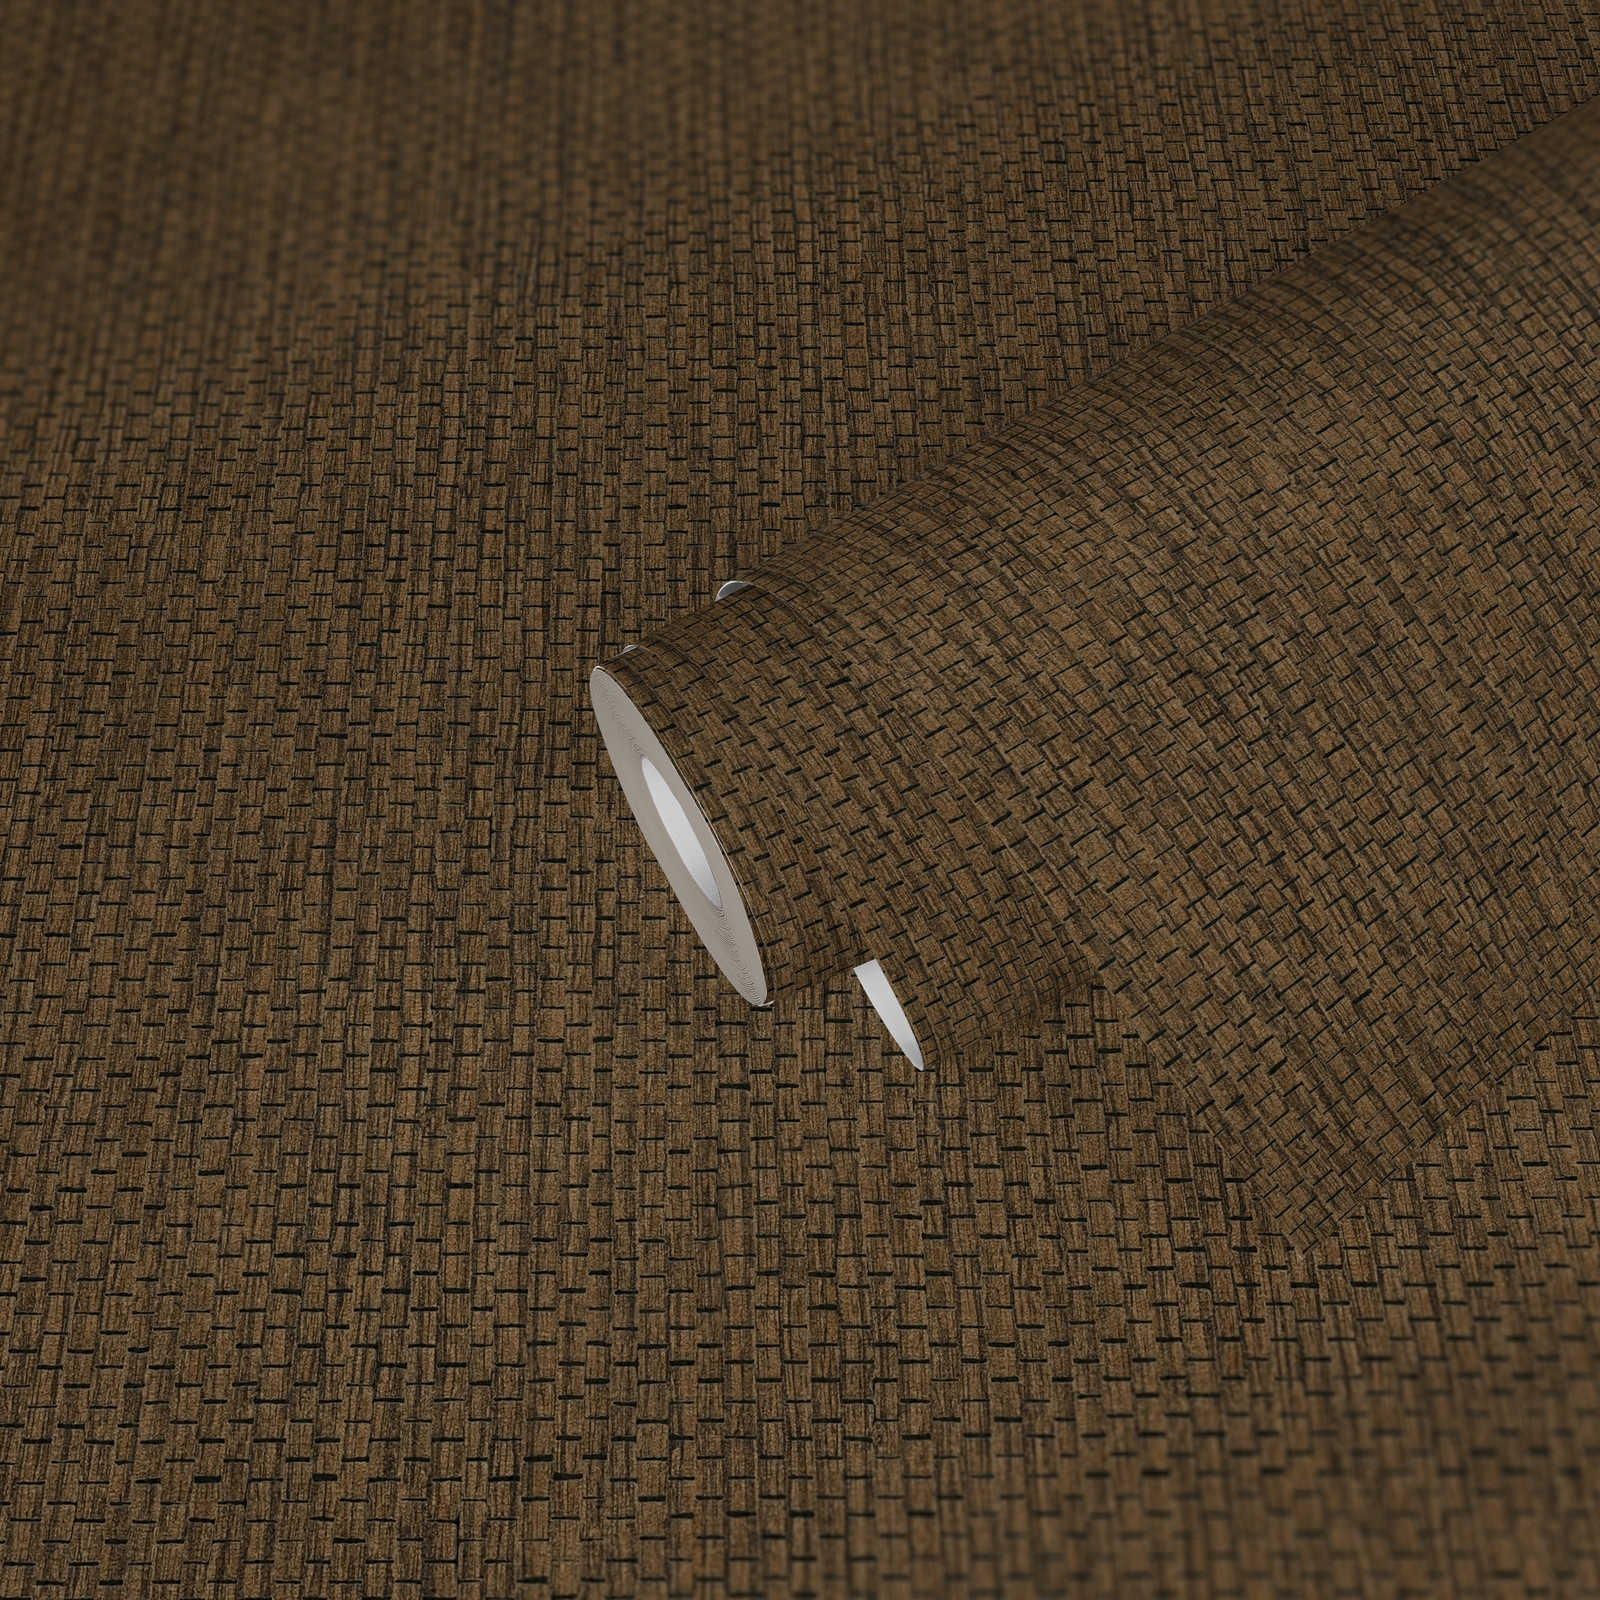             Wallpaper with raffia natural fabric pattern - Brown
        